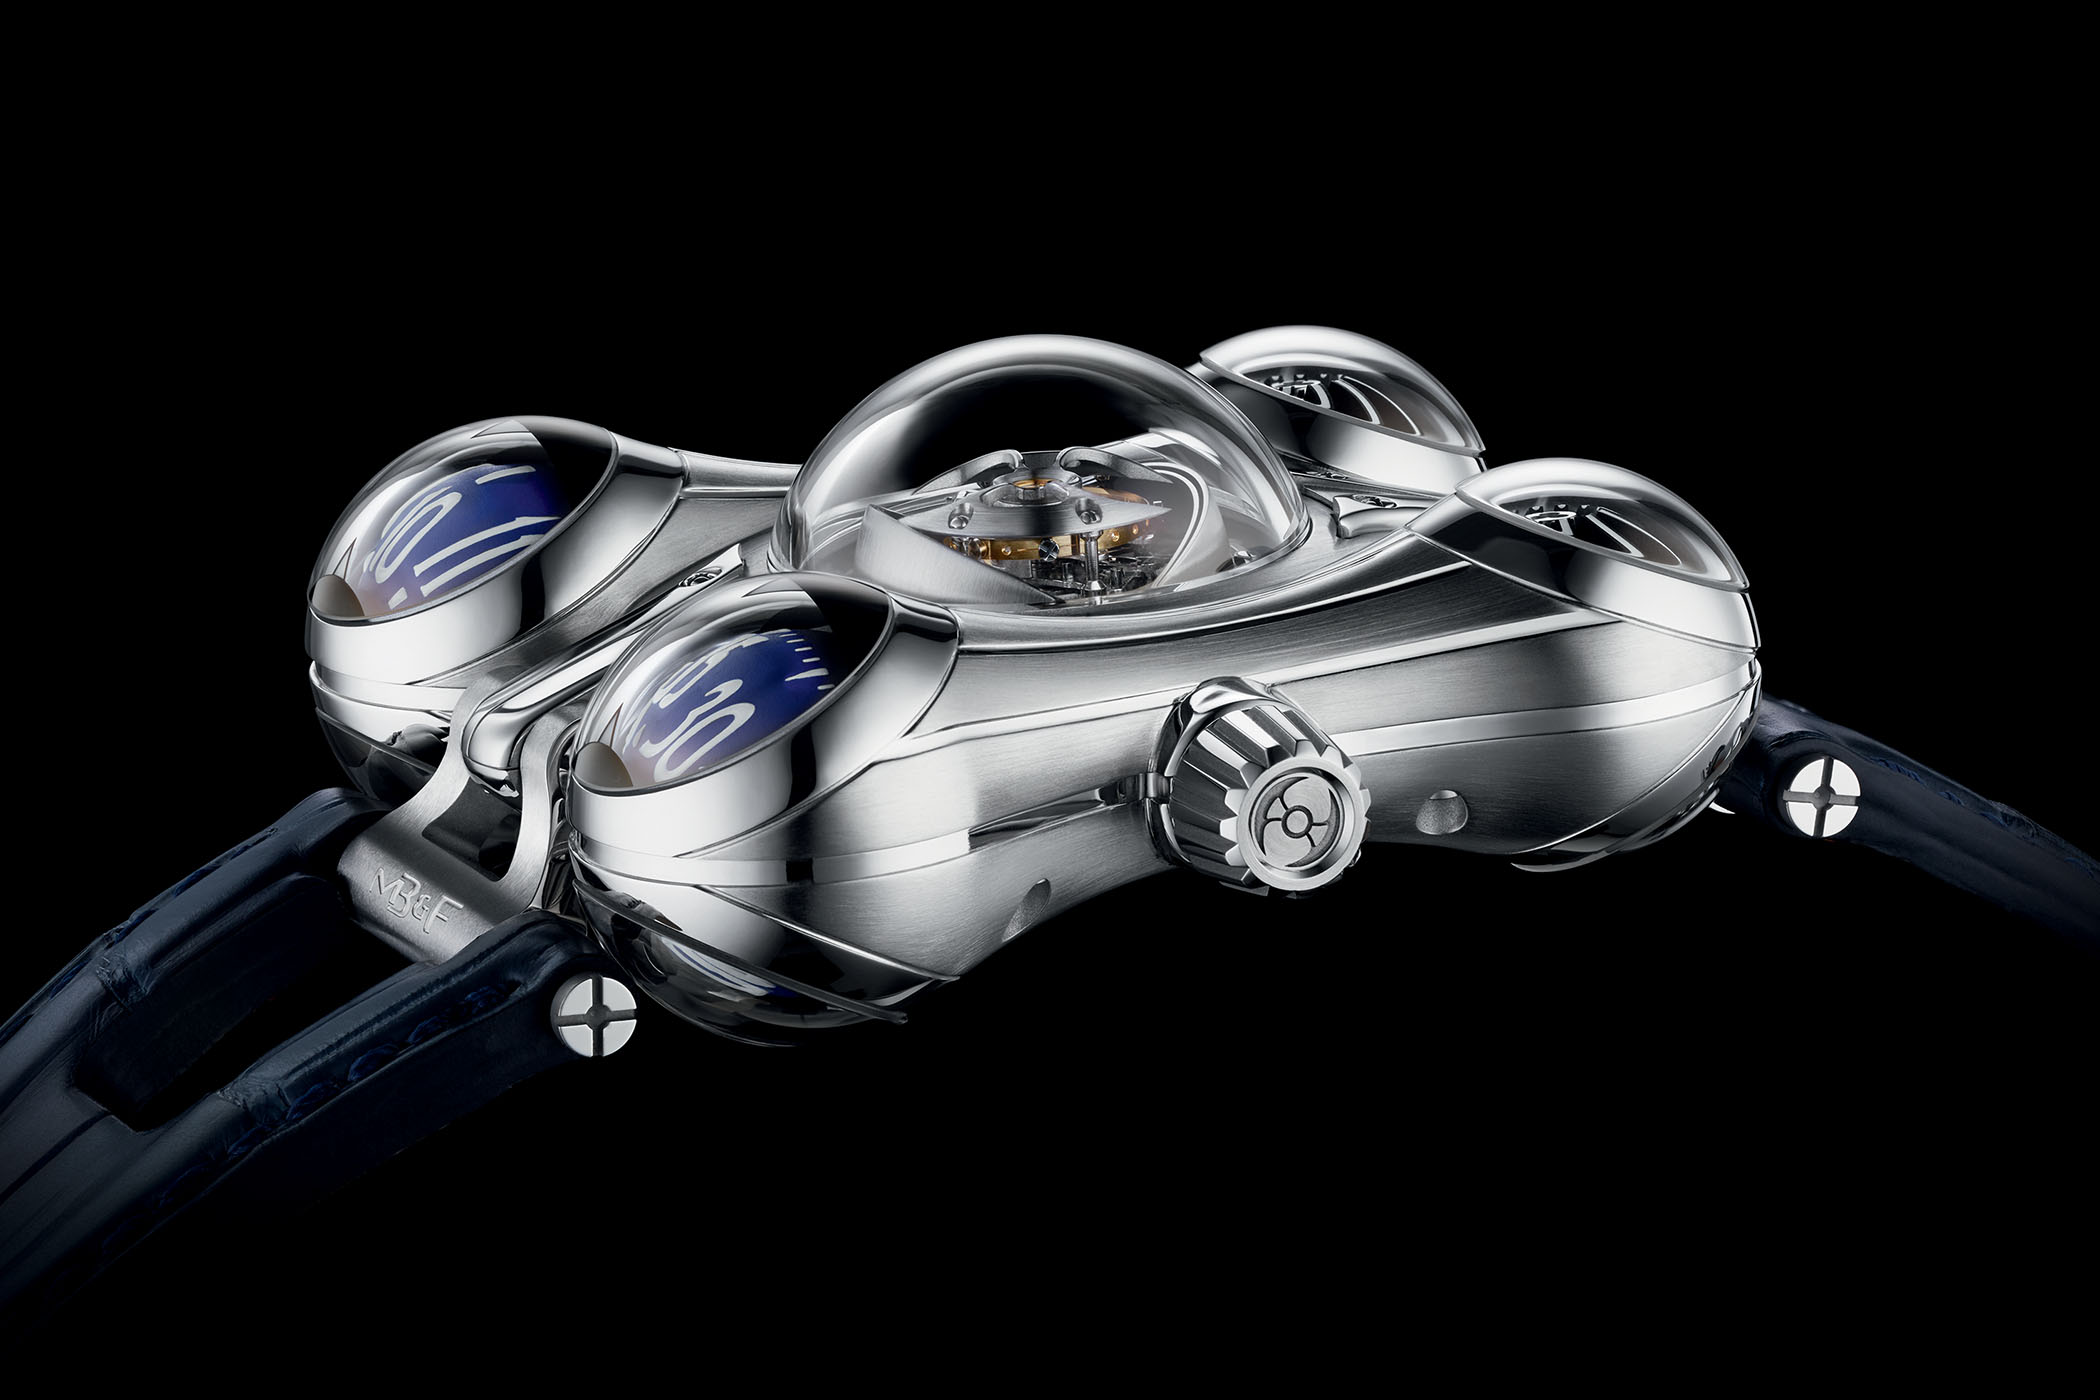 MB&F HM6 Final Edition Steel SIHH 2019